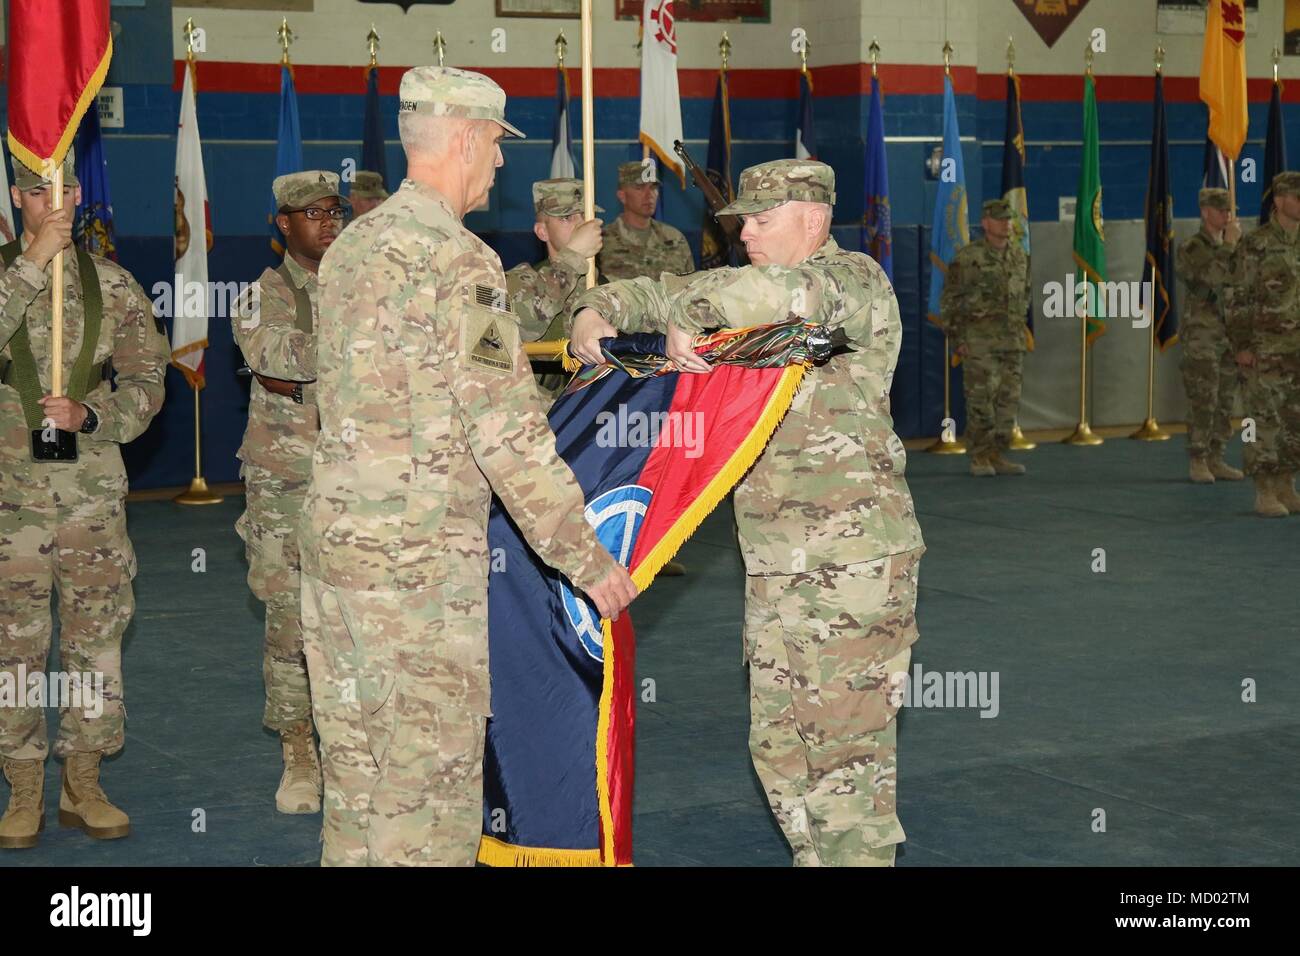 CAMP ARIFJAN, Kuwait – Maj. Gen. Victor Braden (left), 35th Infantry Division commanding general, and Command Sgt. Maj. Timothy Newton case the division’s colors during a transfer of authority ceremony March 8, 2018. The headquarters battalion of the 28th Infantry Division, Pennsylvania Army National Guard, assumed responsibility for Task Force Spartan and will serve as a division headquarters for roughly 10,000 soldiers conducting theater security operations in the Middle East. The 35th Infantry Division is comprised of soldiers from the Missouri and Kansas National Guard. (U.S. Army photo by Stock Photo